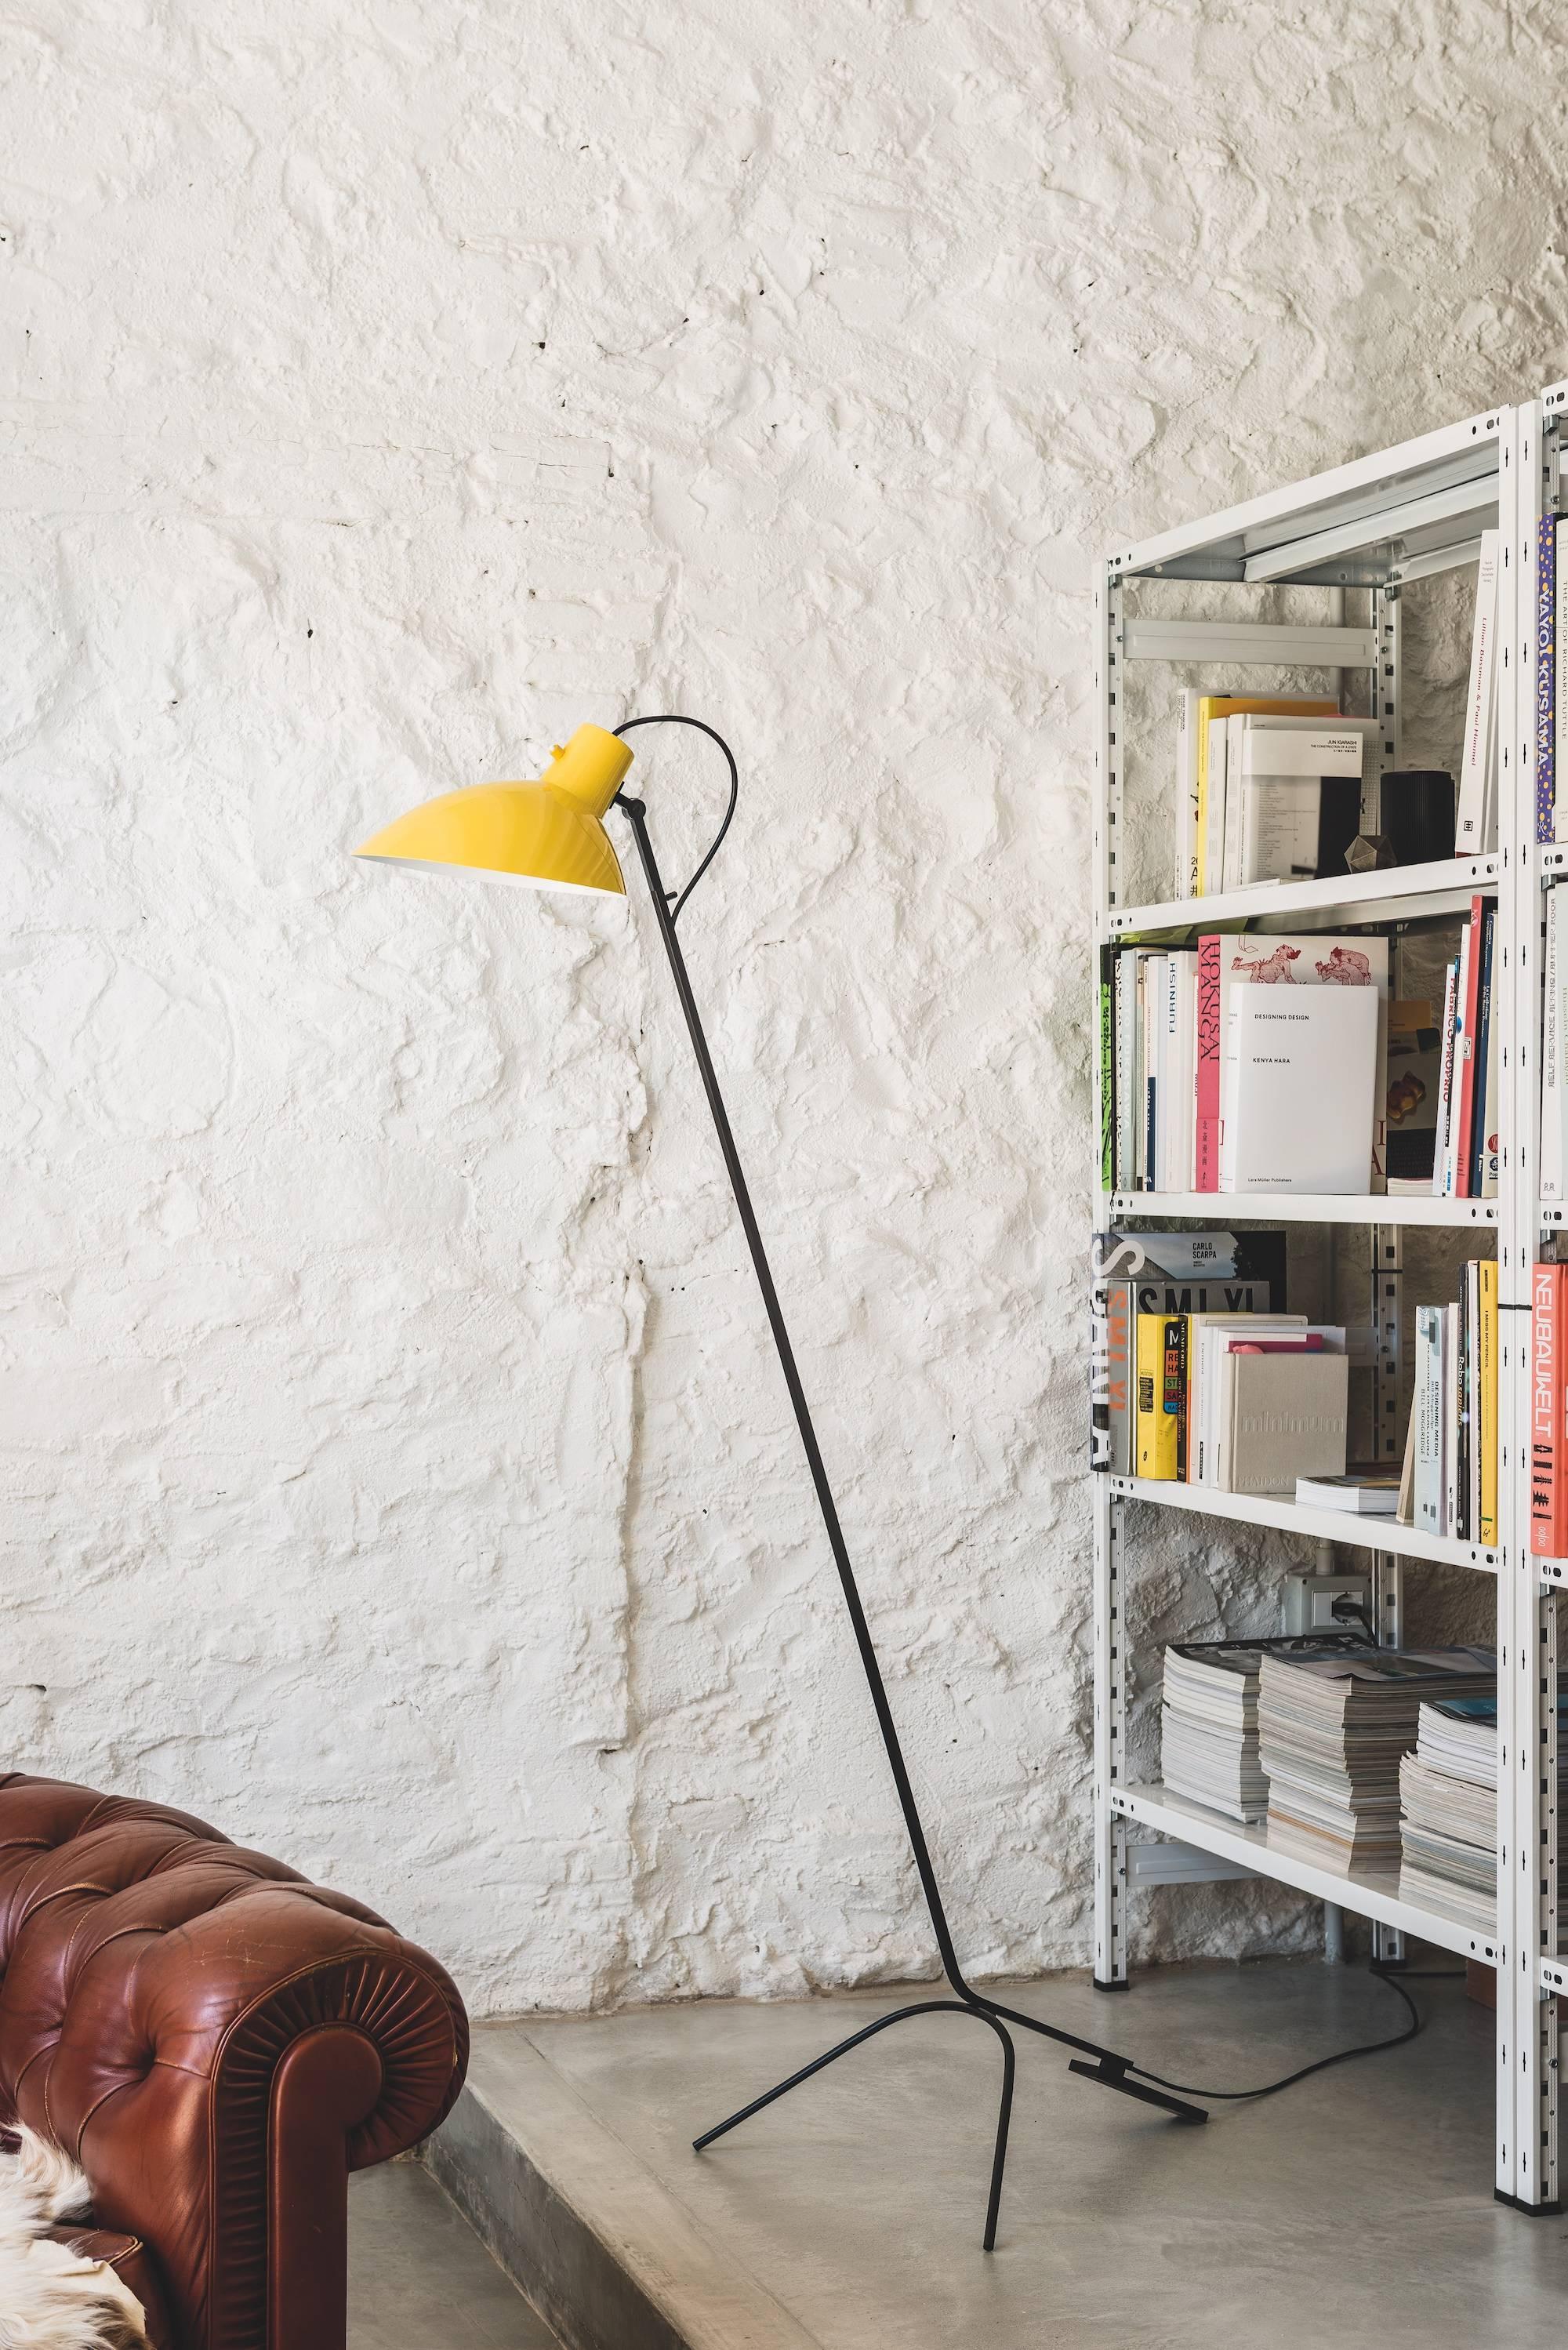 Vittoriano Viganò 'VV Cinquanta' floor lamp in yellow for Astep. Viganò was the art director of Arteluce, the company founded by his creative partner Gino Sarfatti, and the visor was one of his most celebrated designs. This is a professionally